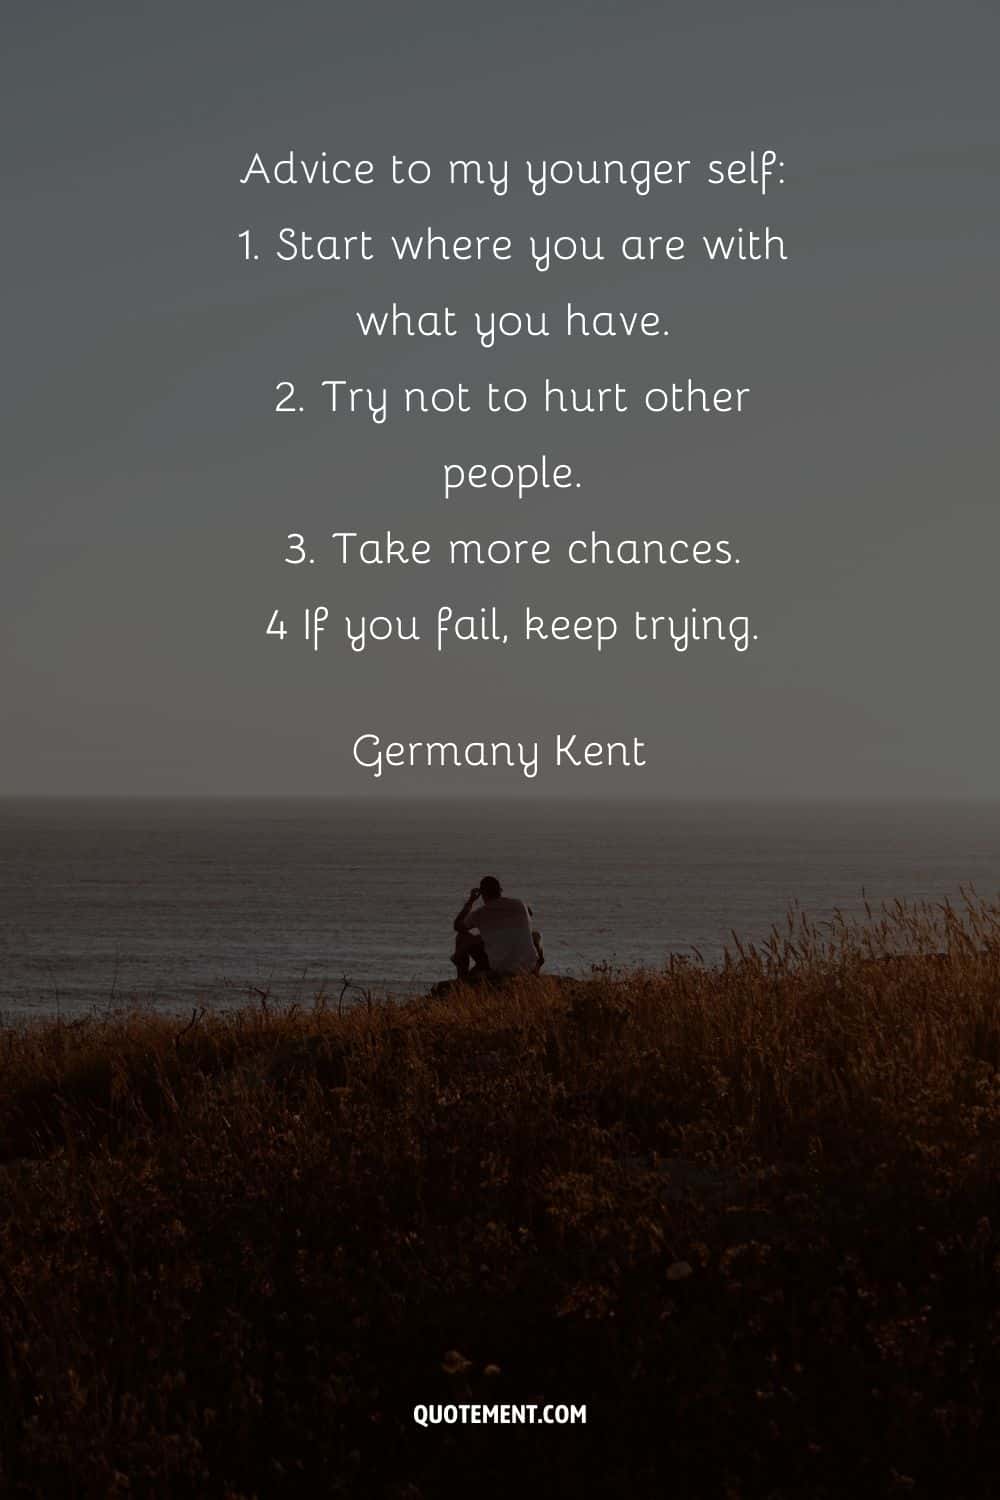 “Advice to my younger self 1. Start where you are with what you have. 2. Try not to hurt other people. 3. Take more chances. 4 If you fail, keep trying.” — Germany Kent